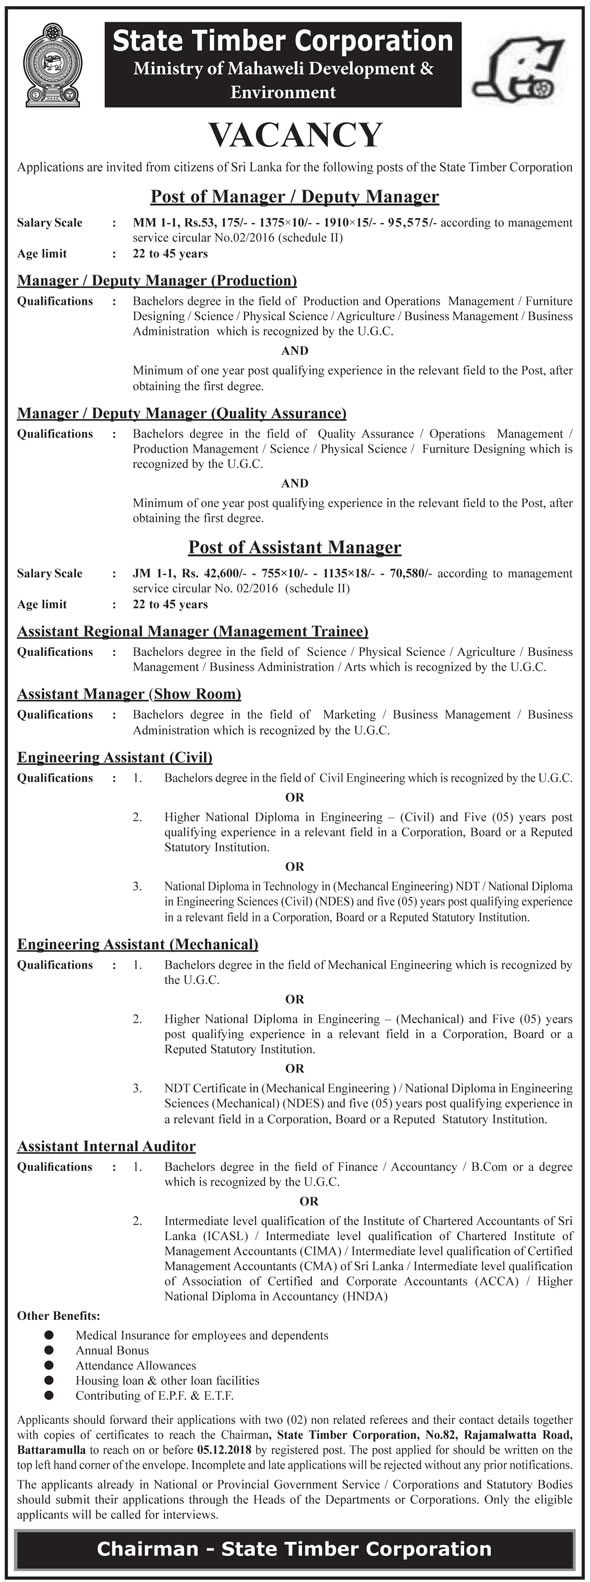 Vacancies in State Timber Corporation - Manager / Deputy Manager, Assistant Regional Manager, Assistant Manager, Engineering Assistant, Assistant Internal Auditor